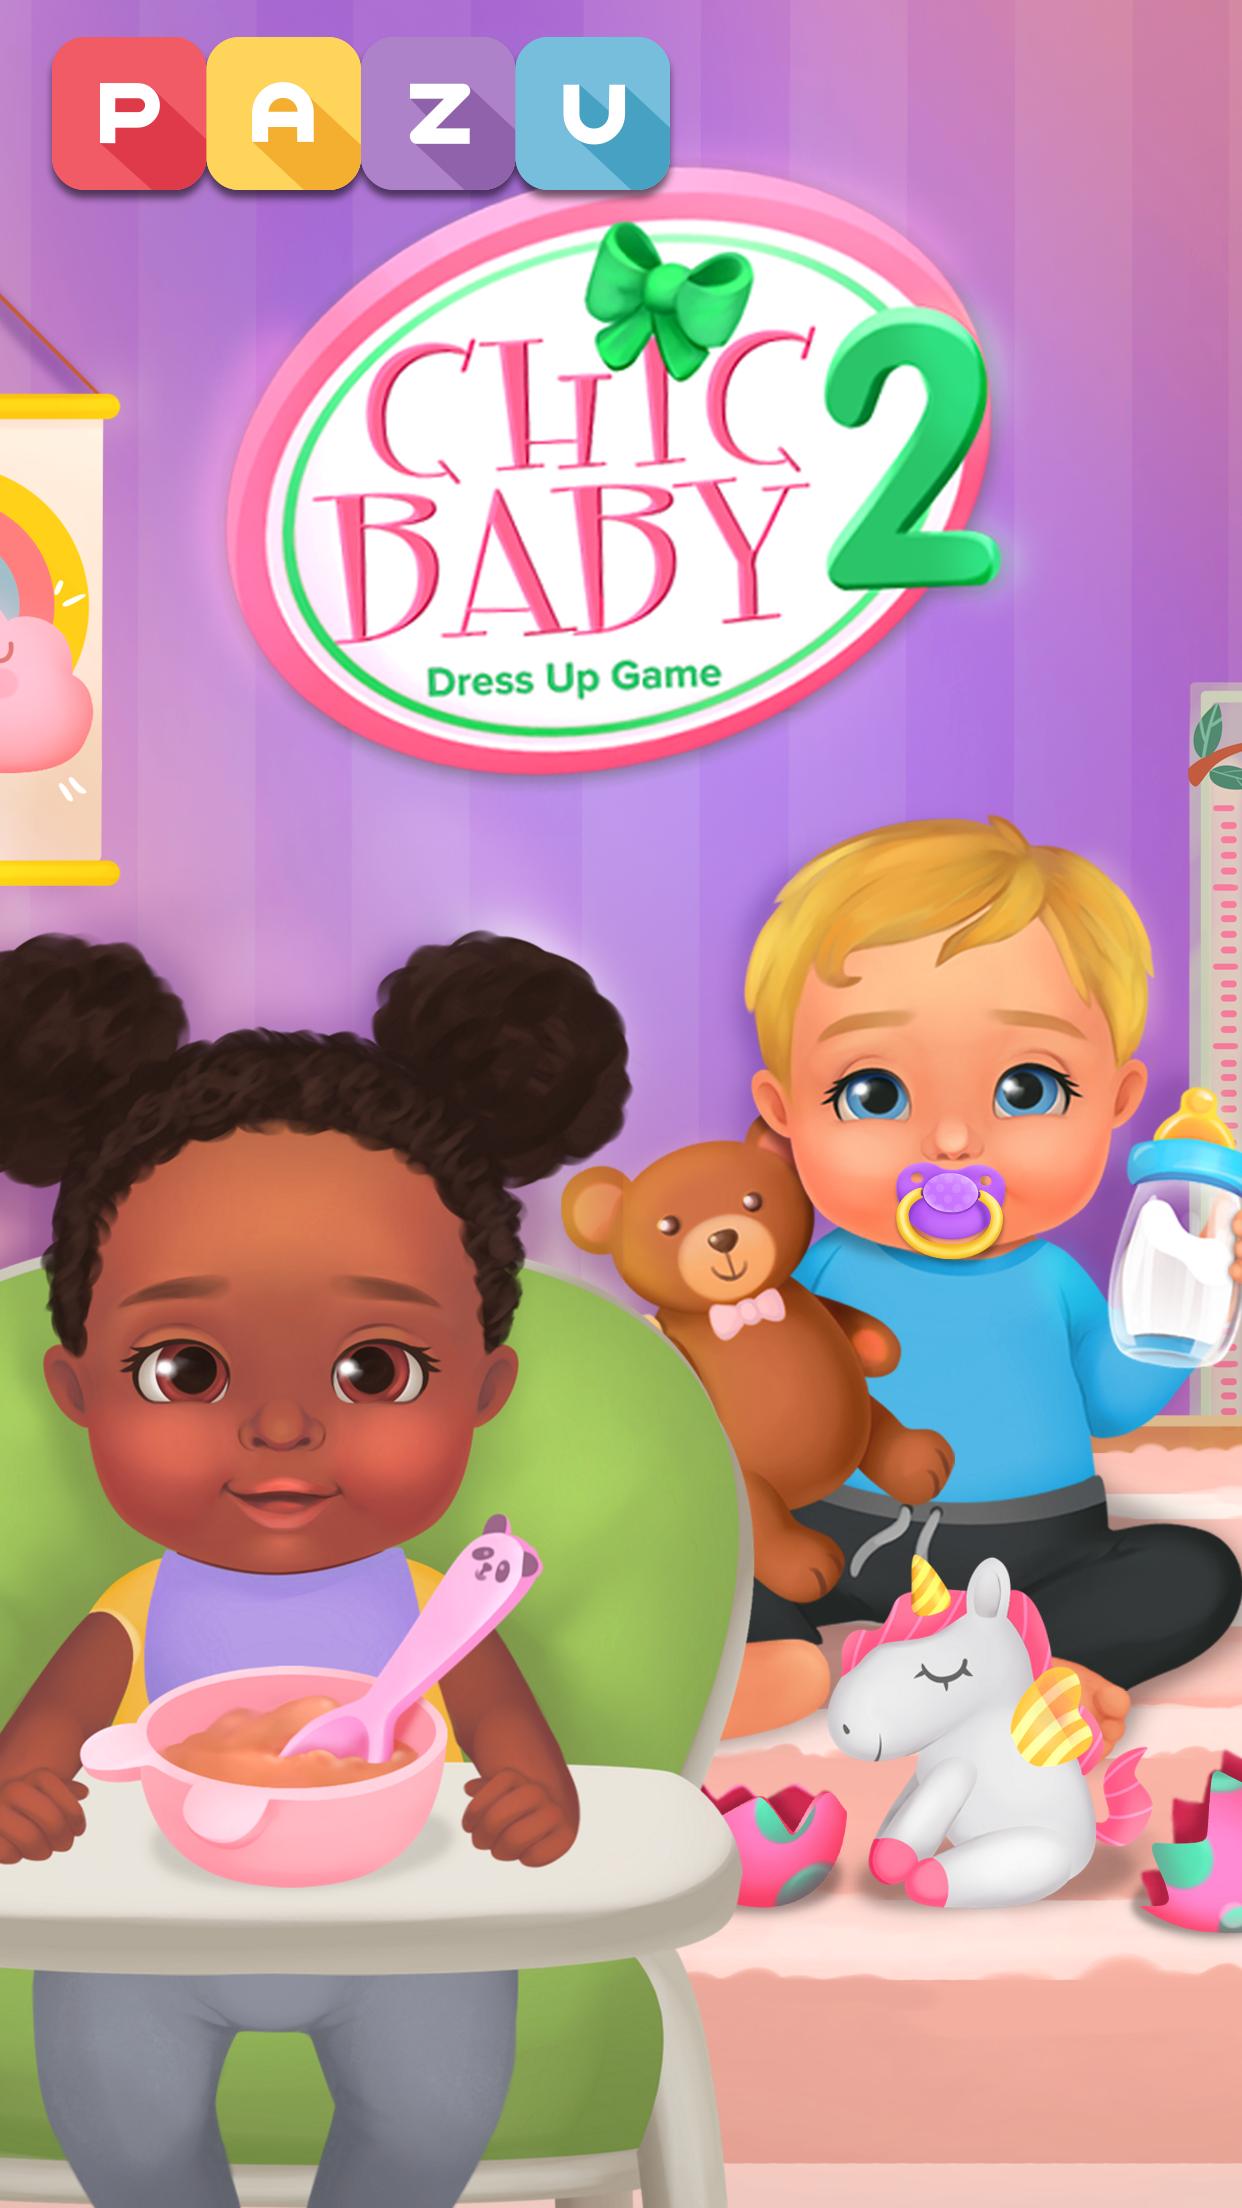 Chic Baby 2 Dress up & baby care games for kids 1.02 Screenshot 1